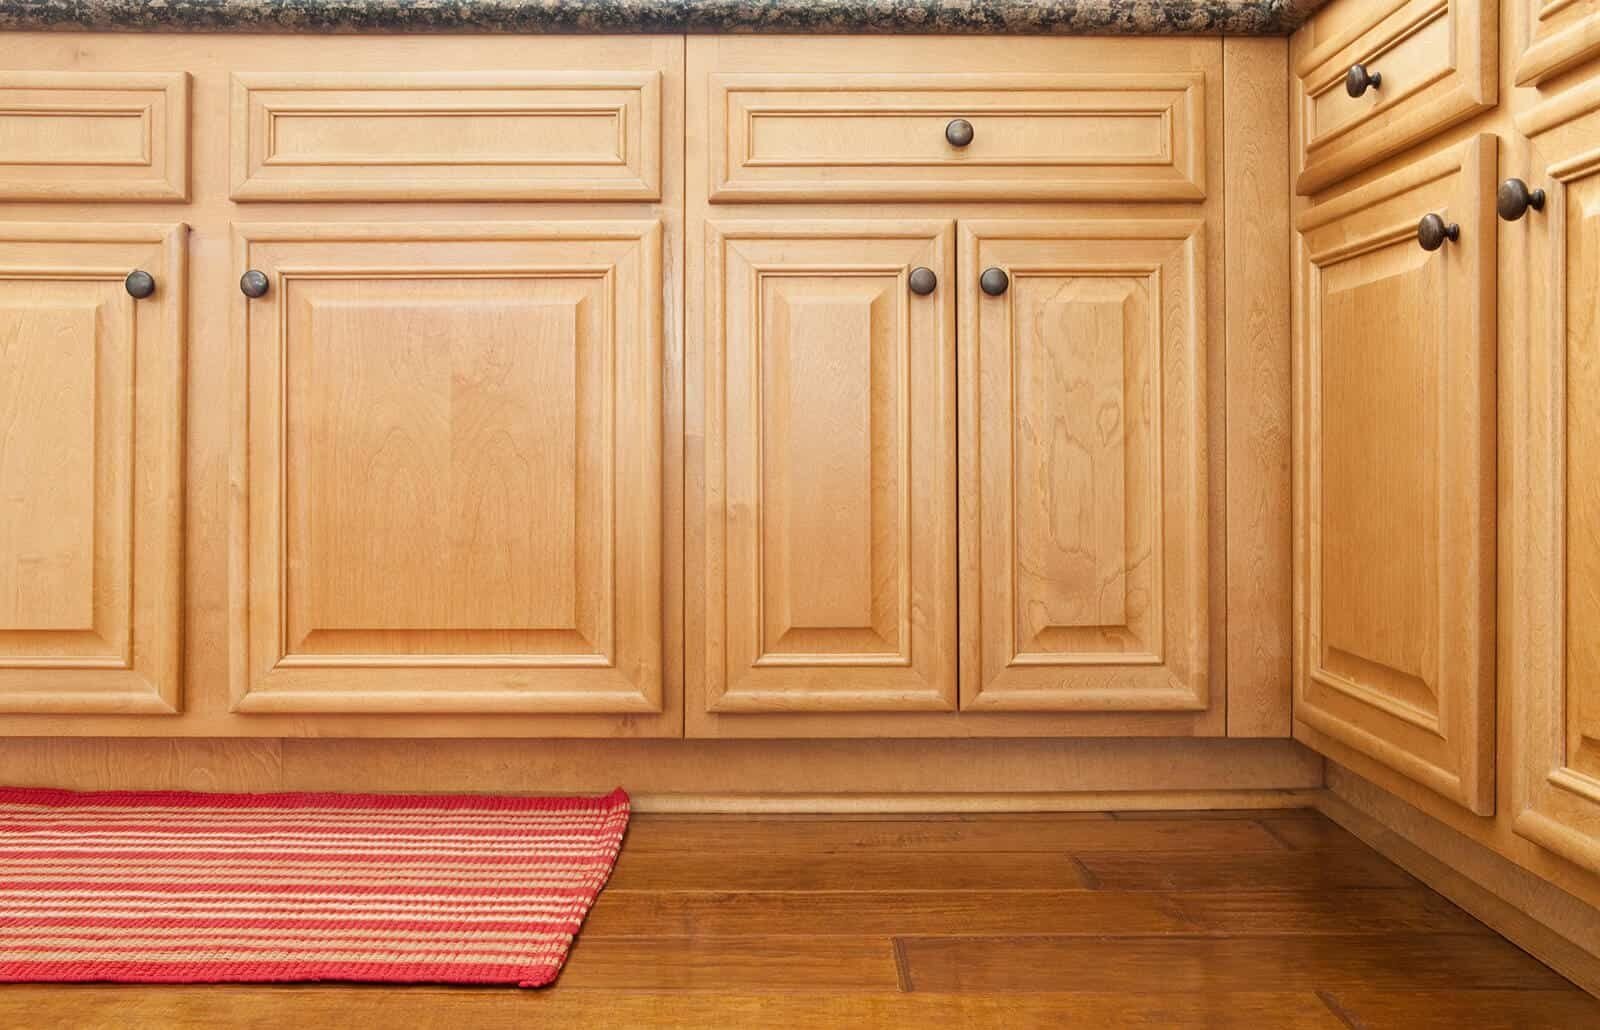 Maintaining Wood Cabinets